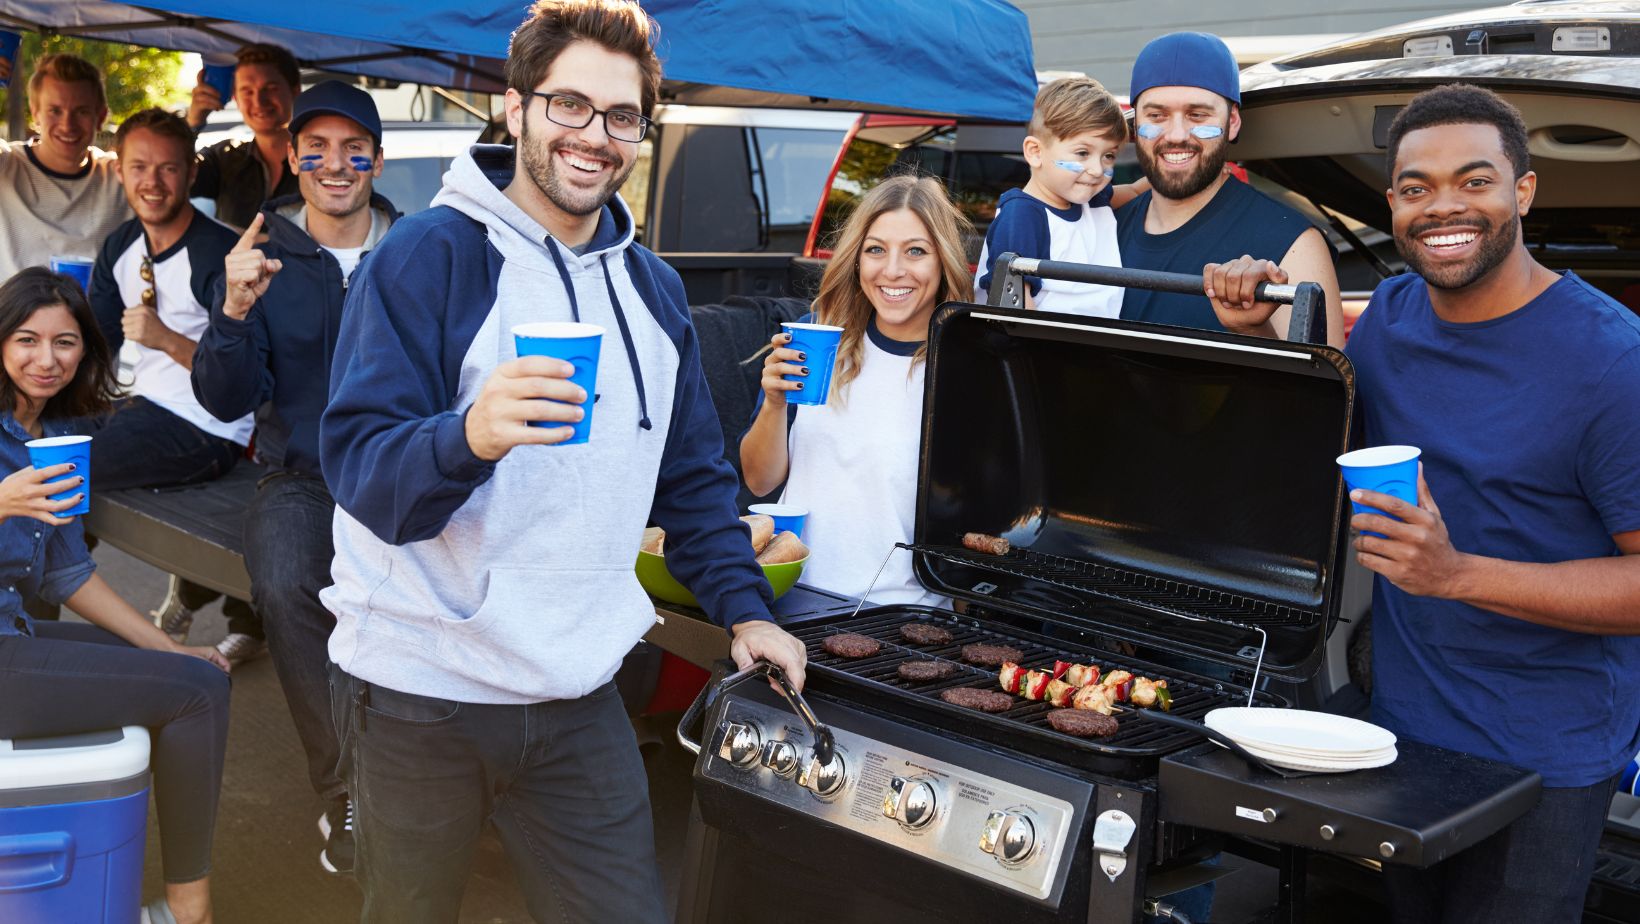 group of people wearing navy and white shirts. in the foreground, a man with brown hair standing in front of a grill holding tongs in his left hand and a blue plastic cup in his right hand